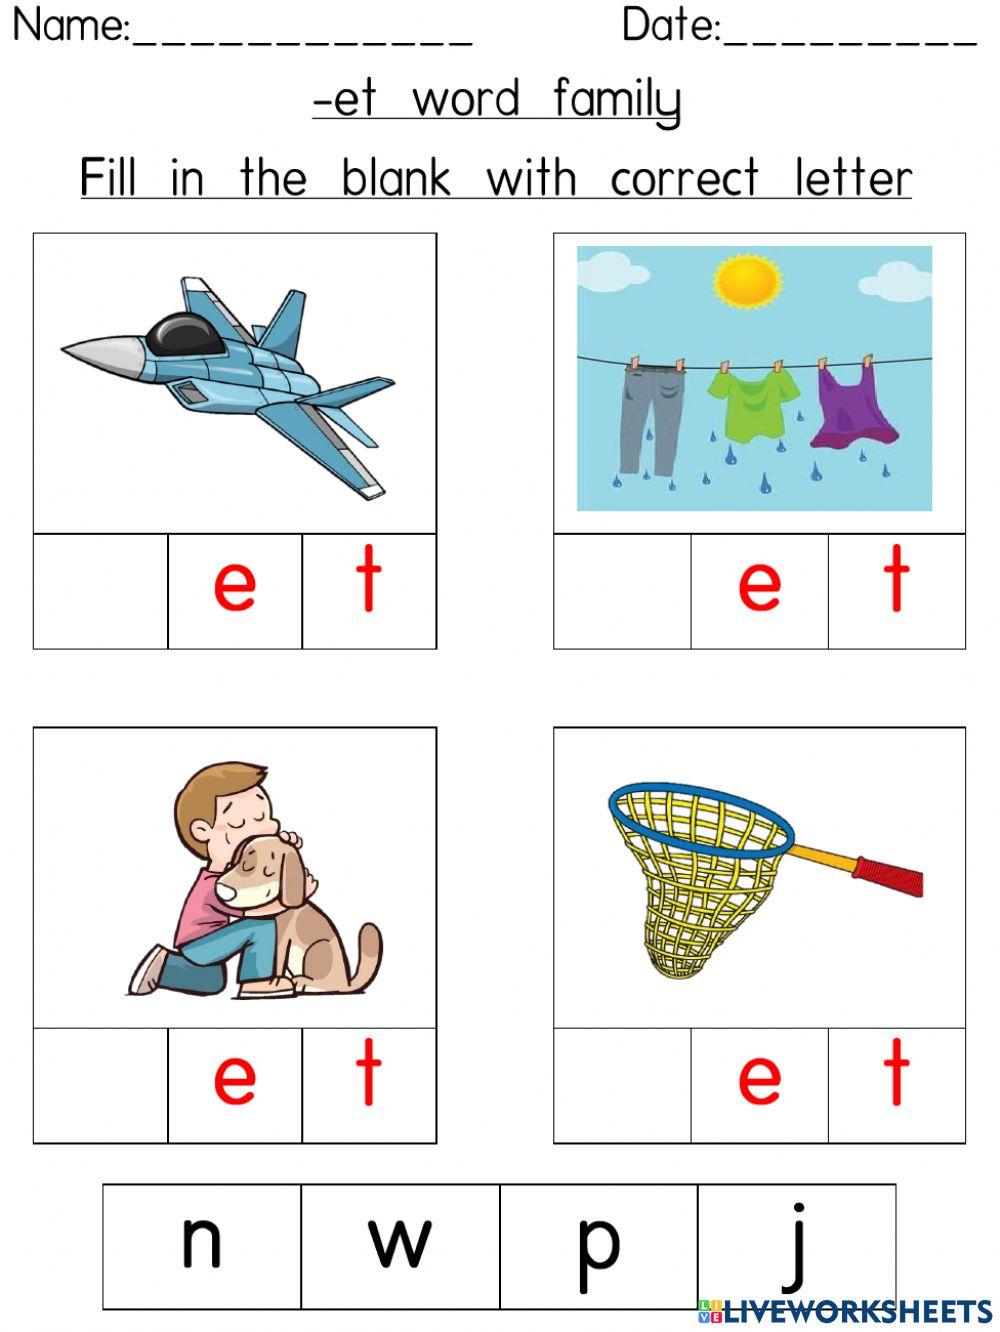 -et word family (Fill in the blank with correct letter)-2